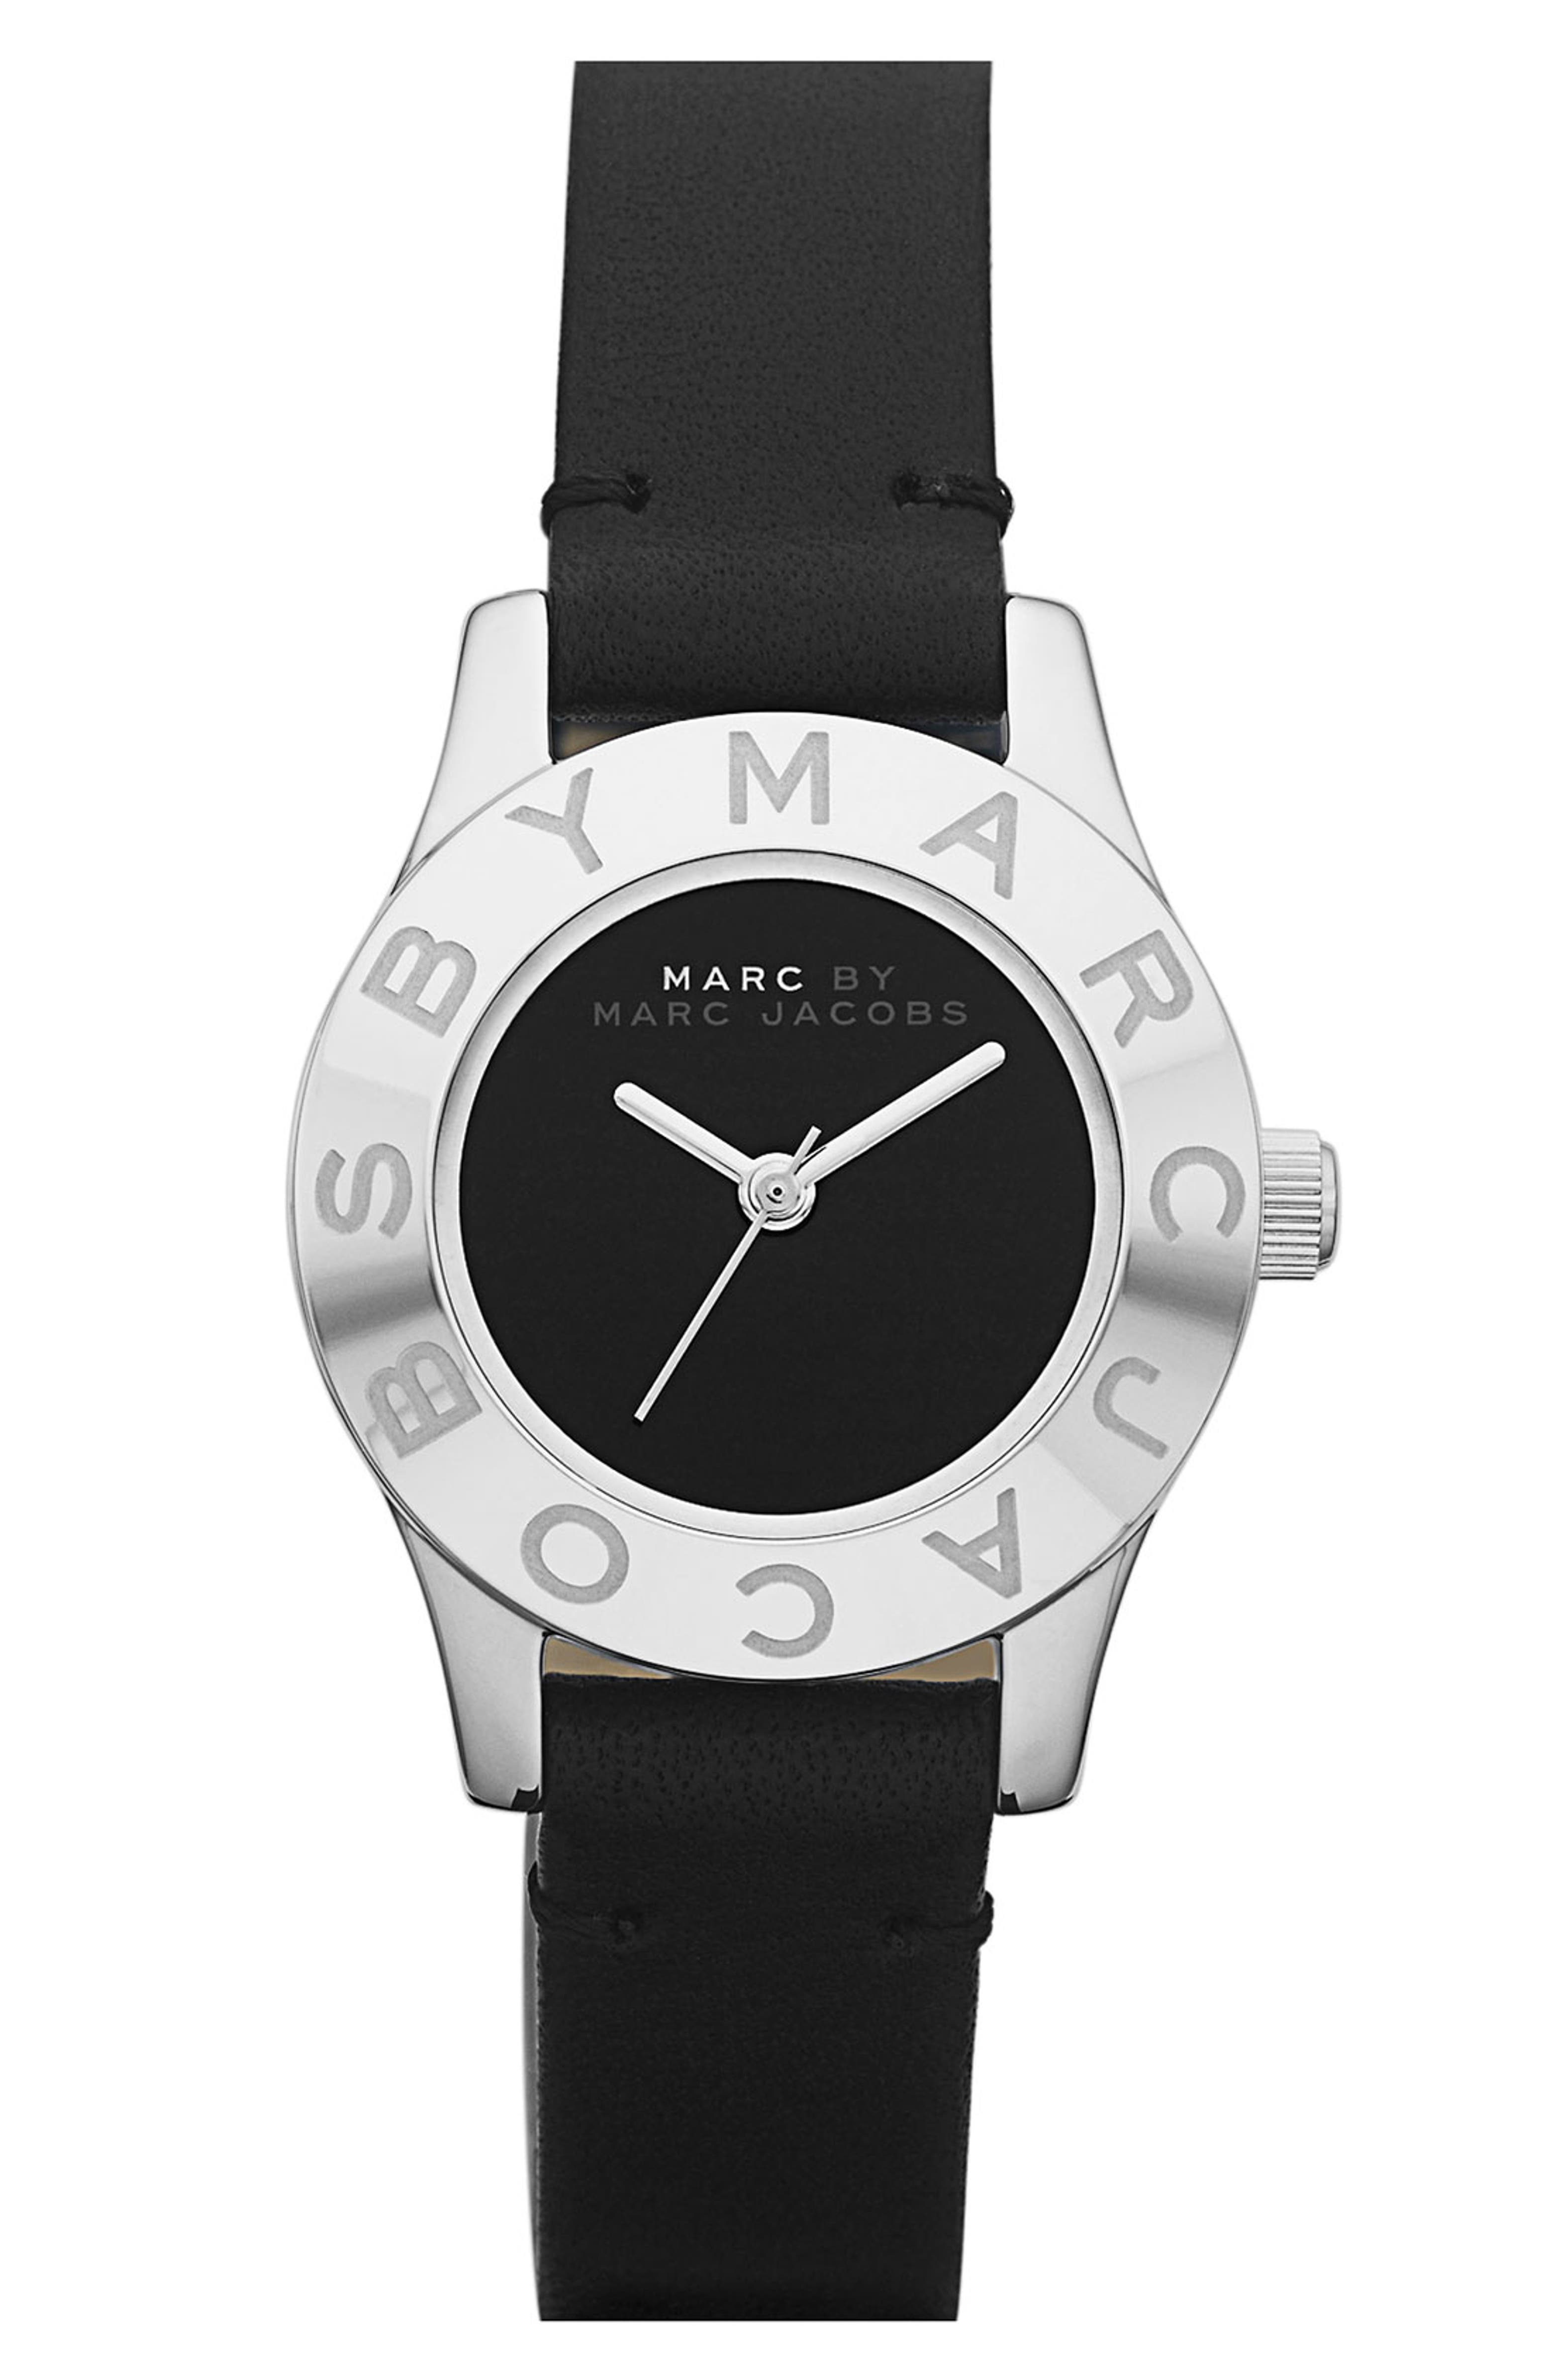 MARC BY MARC JACOBS 'Blade' Round Leather Strap Watch | Nordstrom